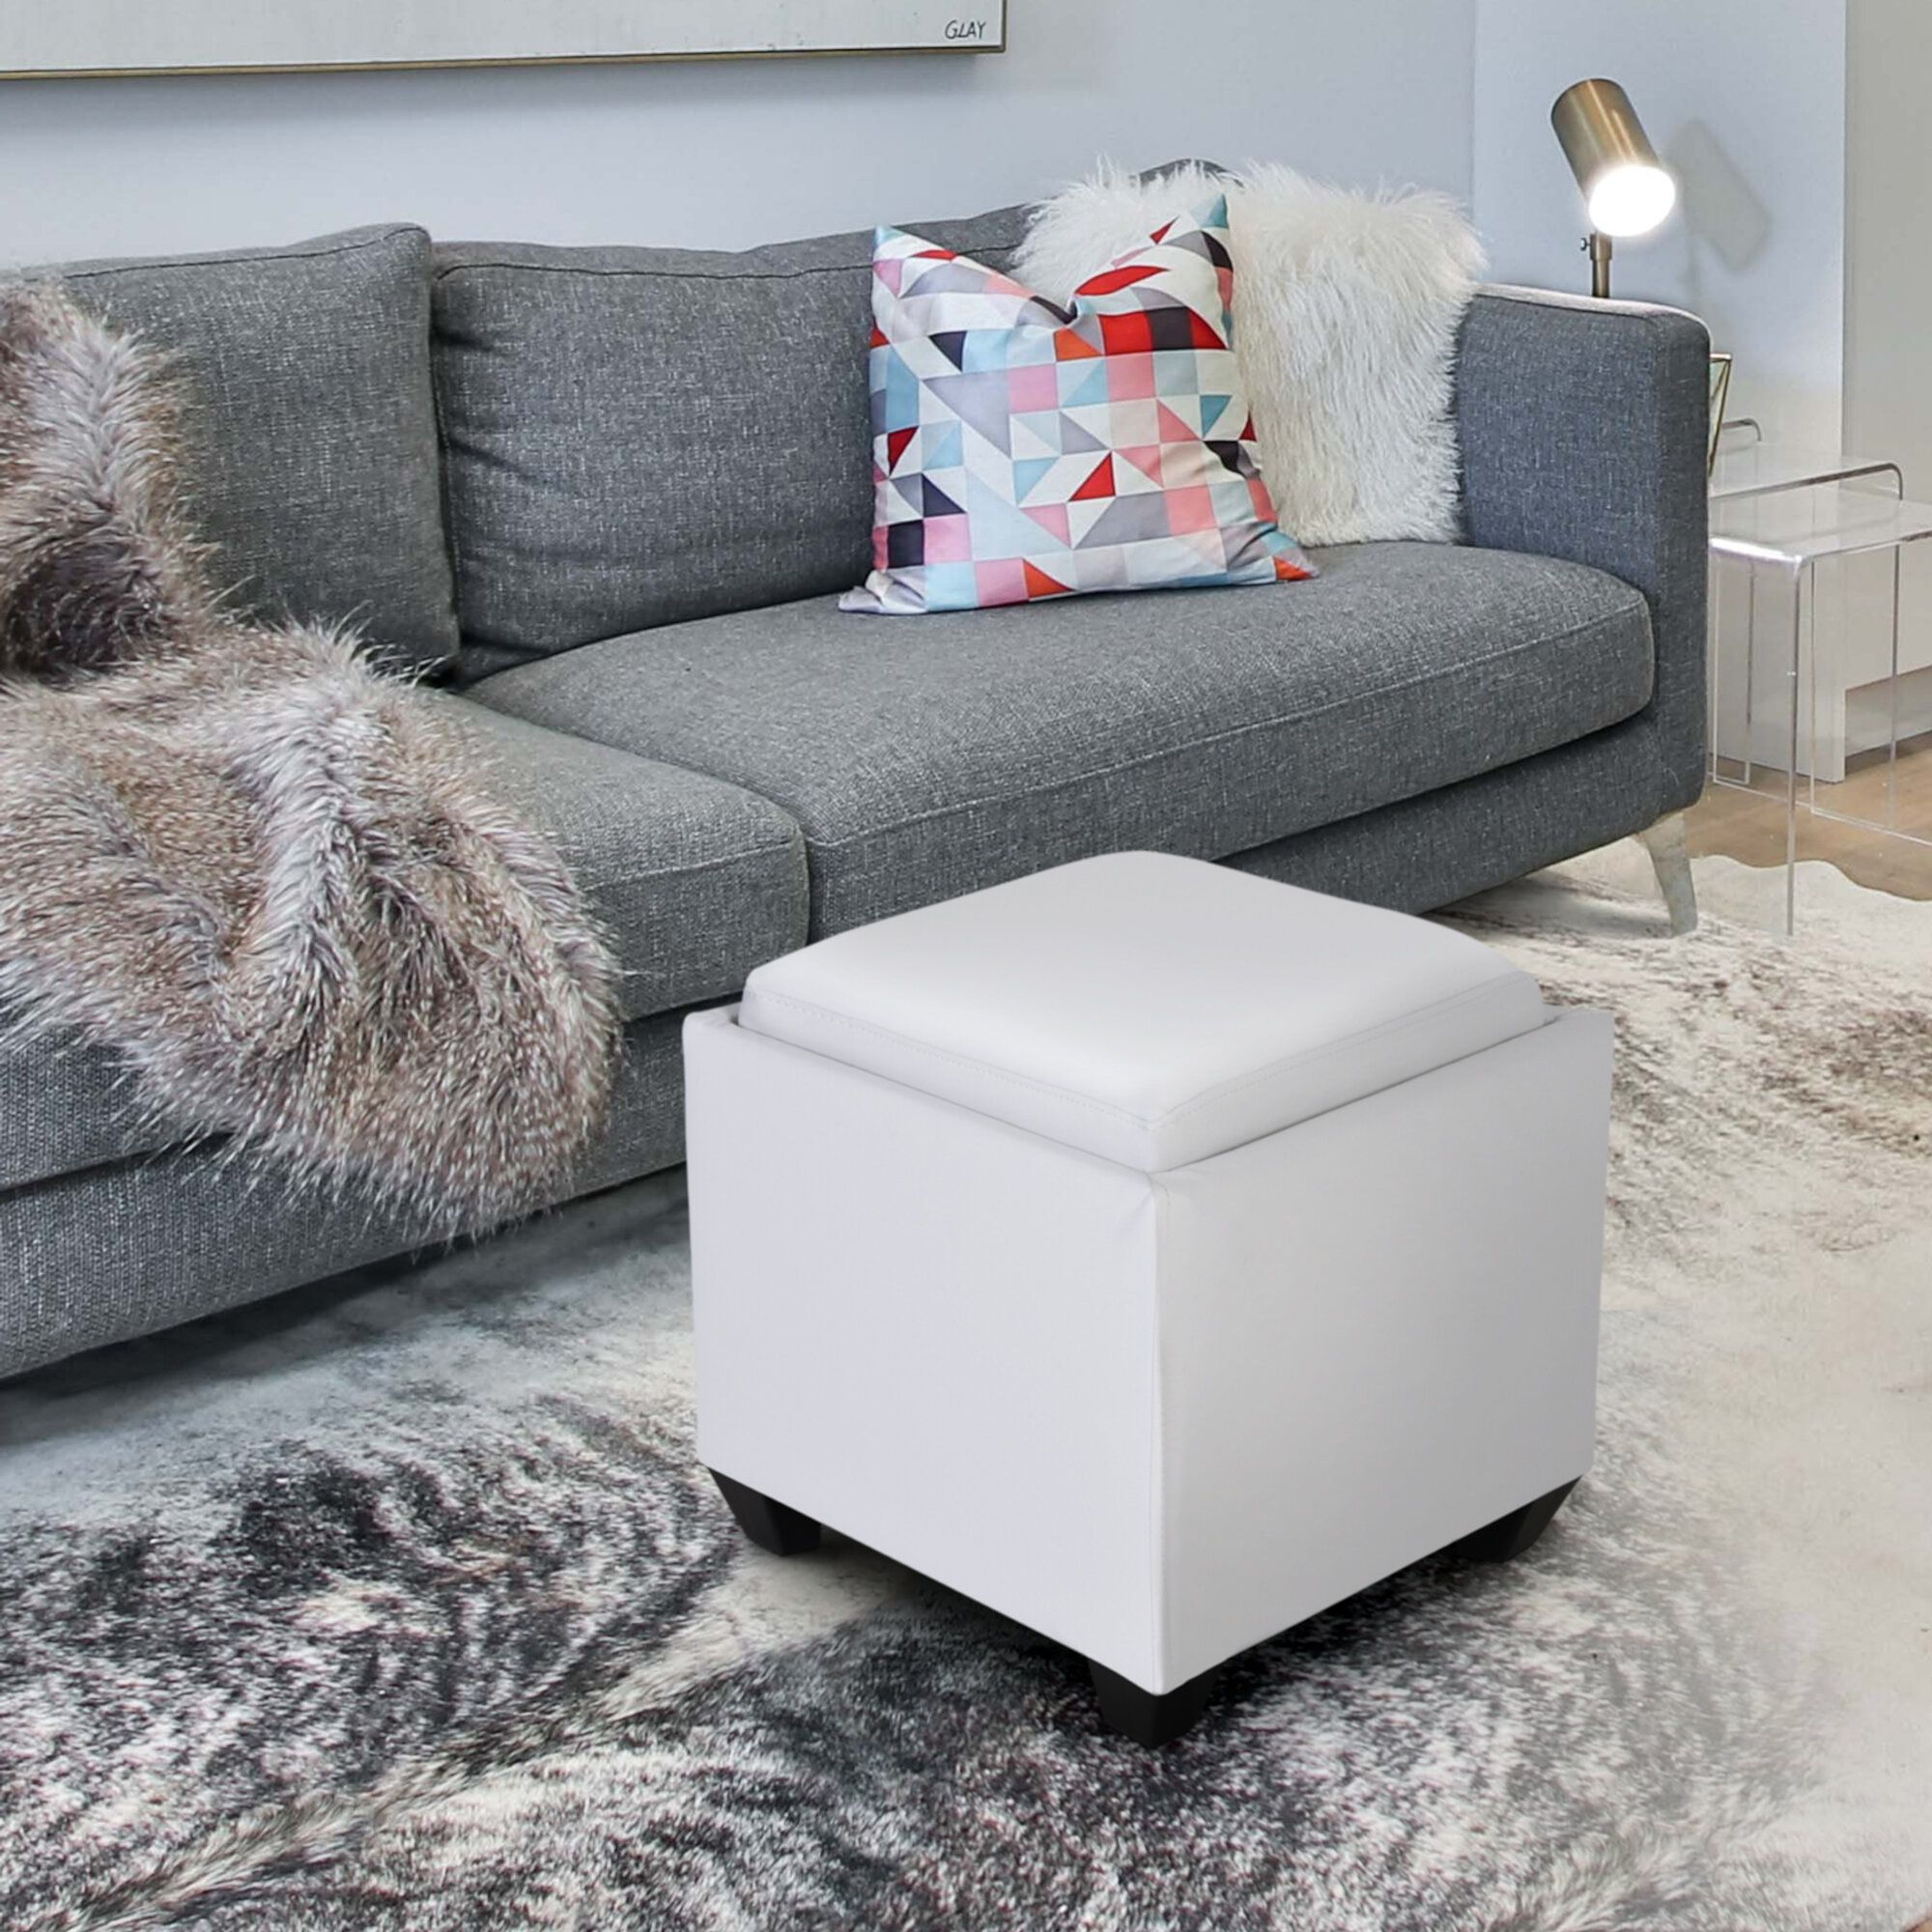 Zenvida Square Storage Ottoman With Tray, Small Cube Footstool | Ebay Within Silver Faux Leather Ottomans With Pull Tab (View 2 of 20)